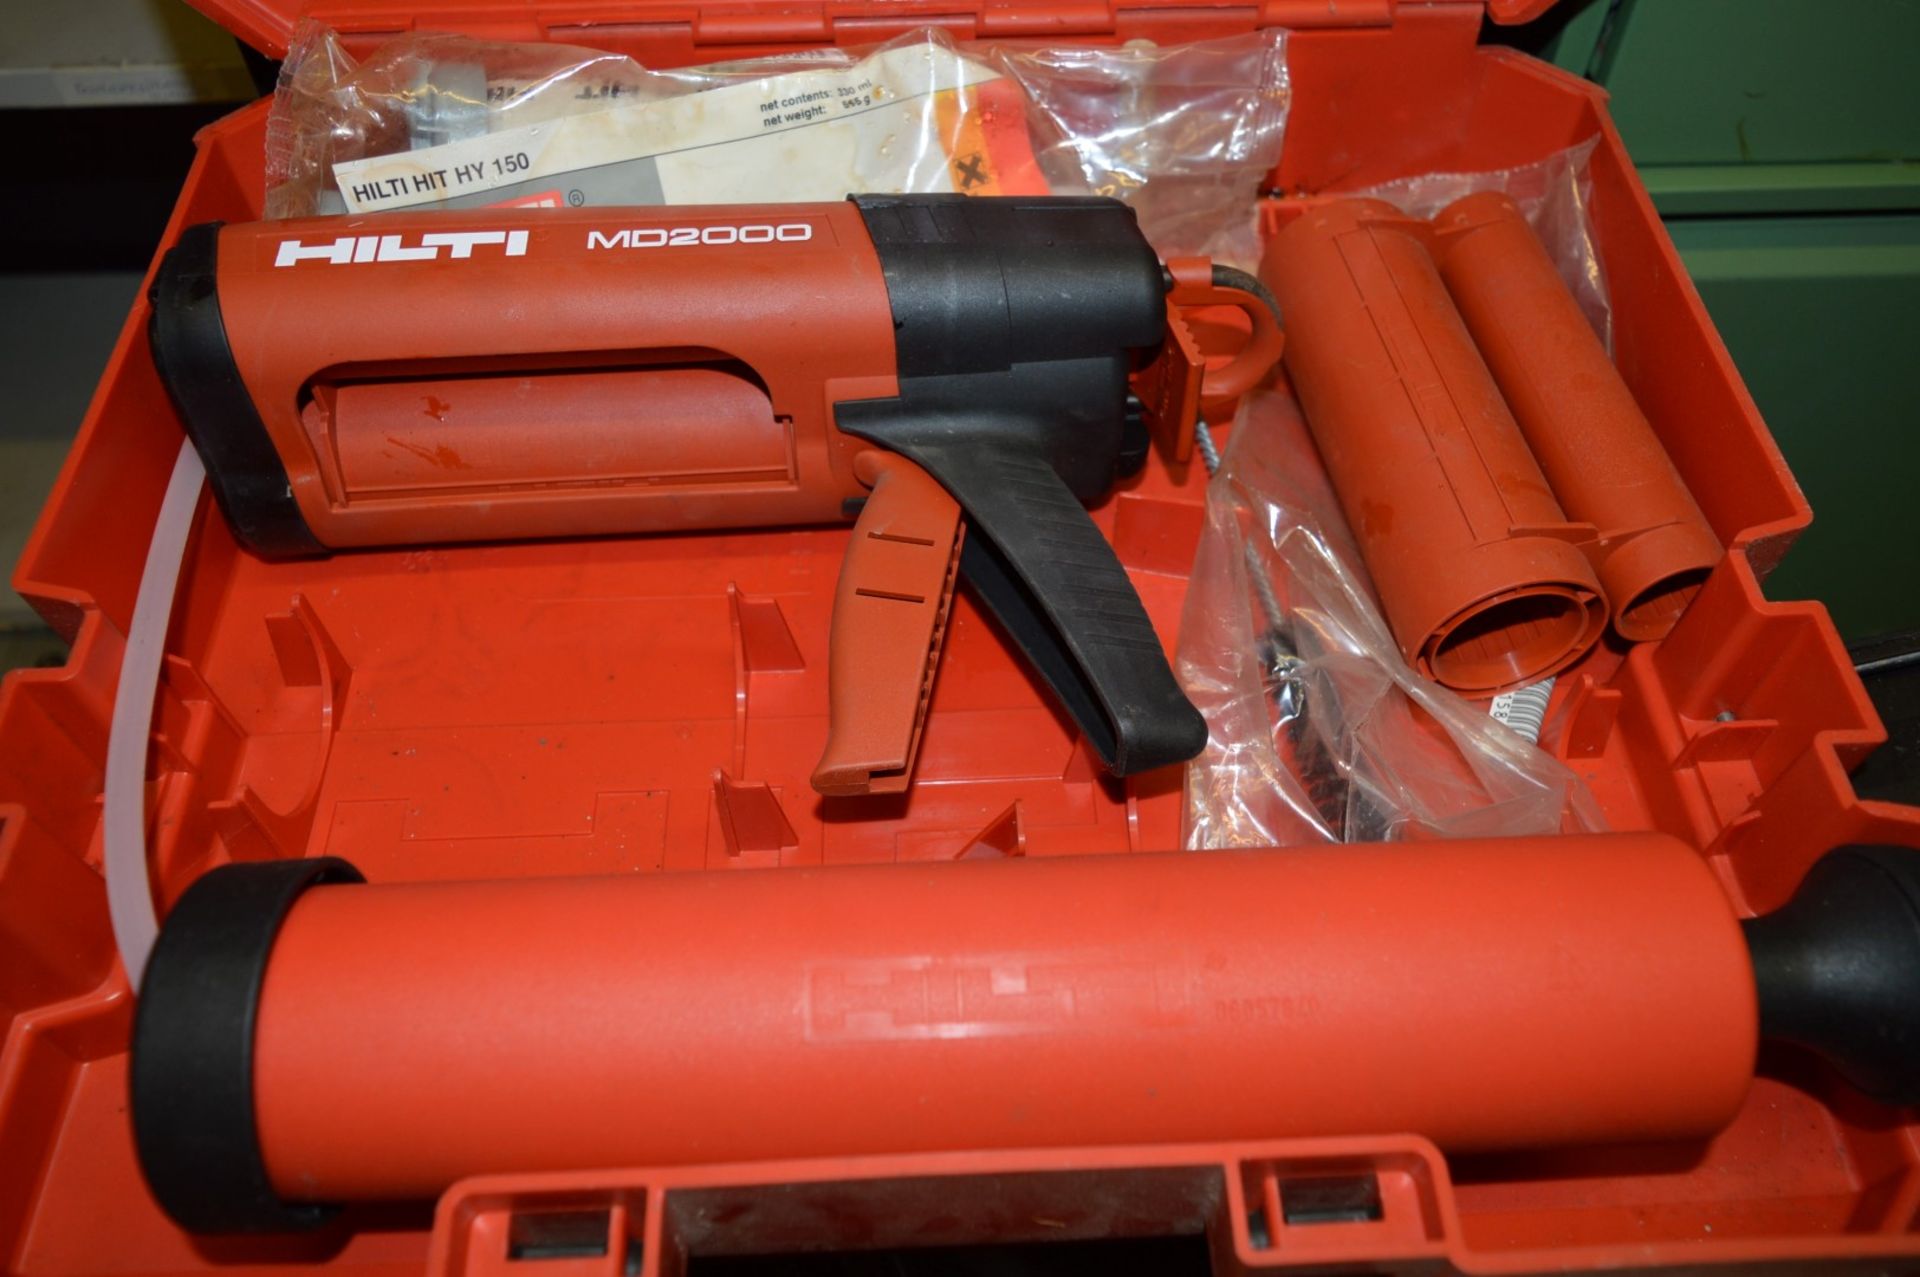 1 x Hilti MD2000 Manual HIT Adhesive Dispenser With Case, Accessories and HIT-HY 150 Pack - Ref: - Image 5 of 7